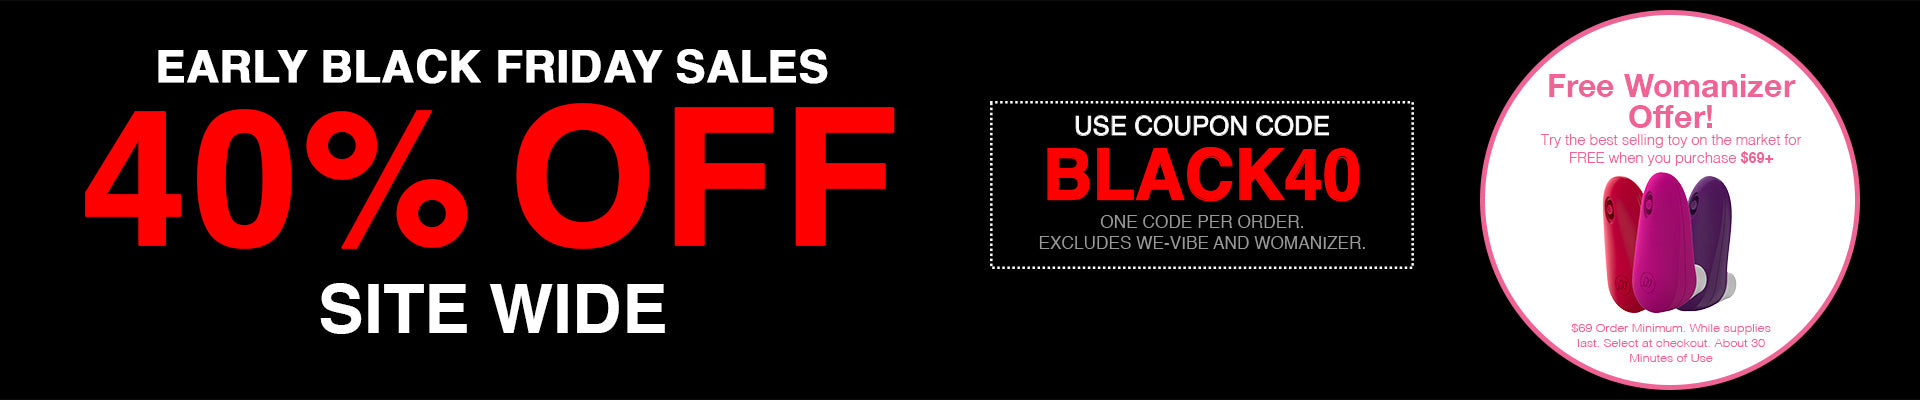 40% Off Site Wide - Use Code BLACK40